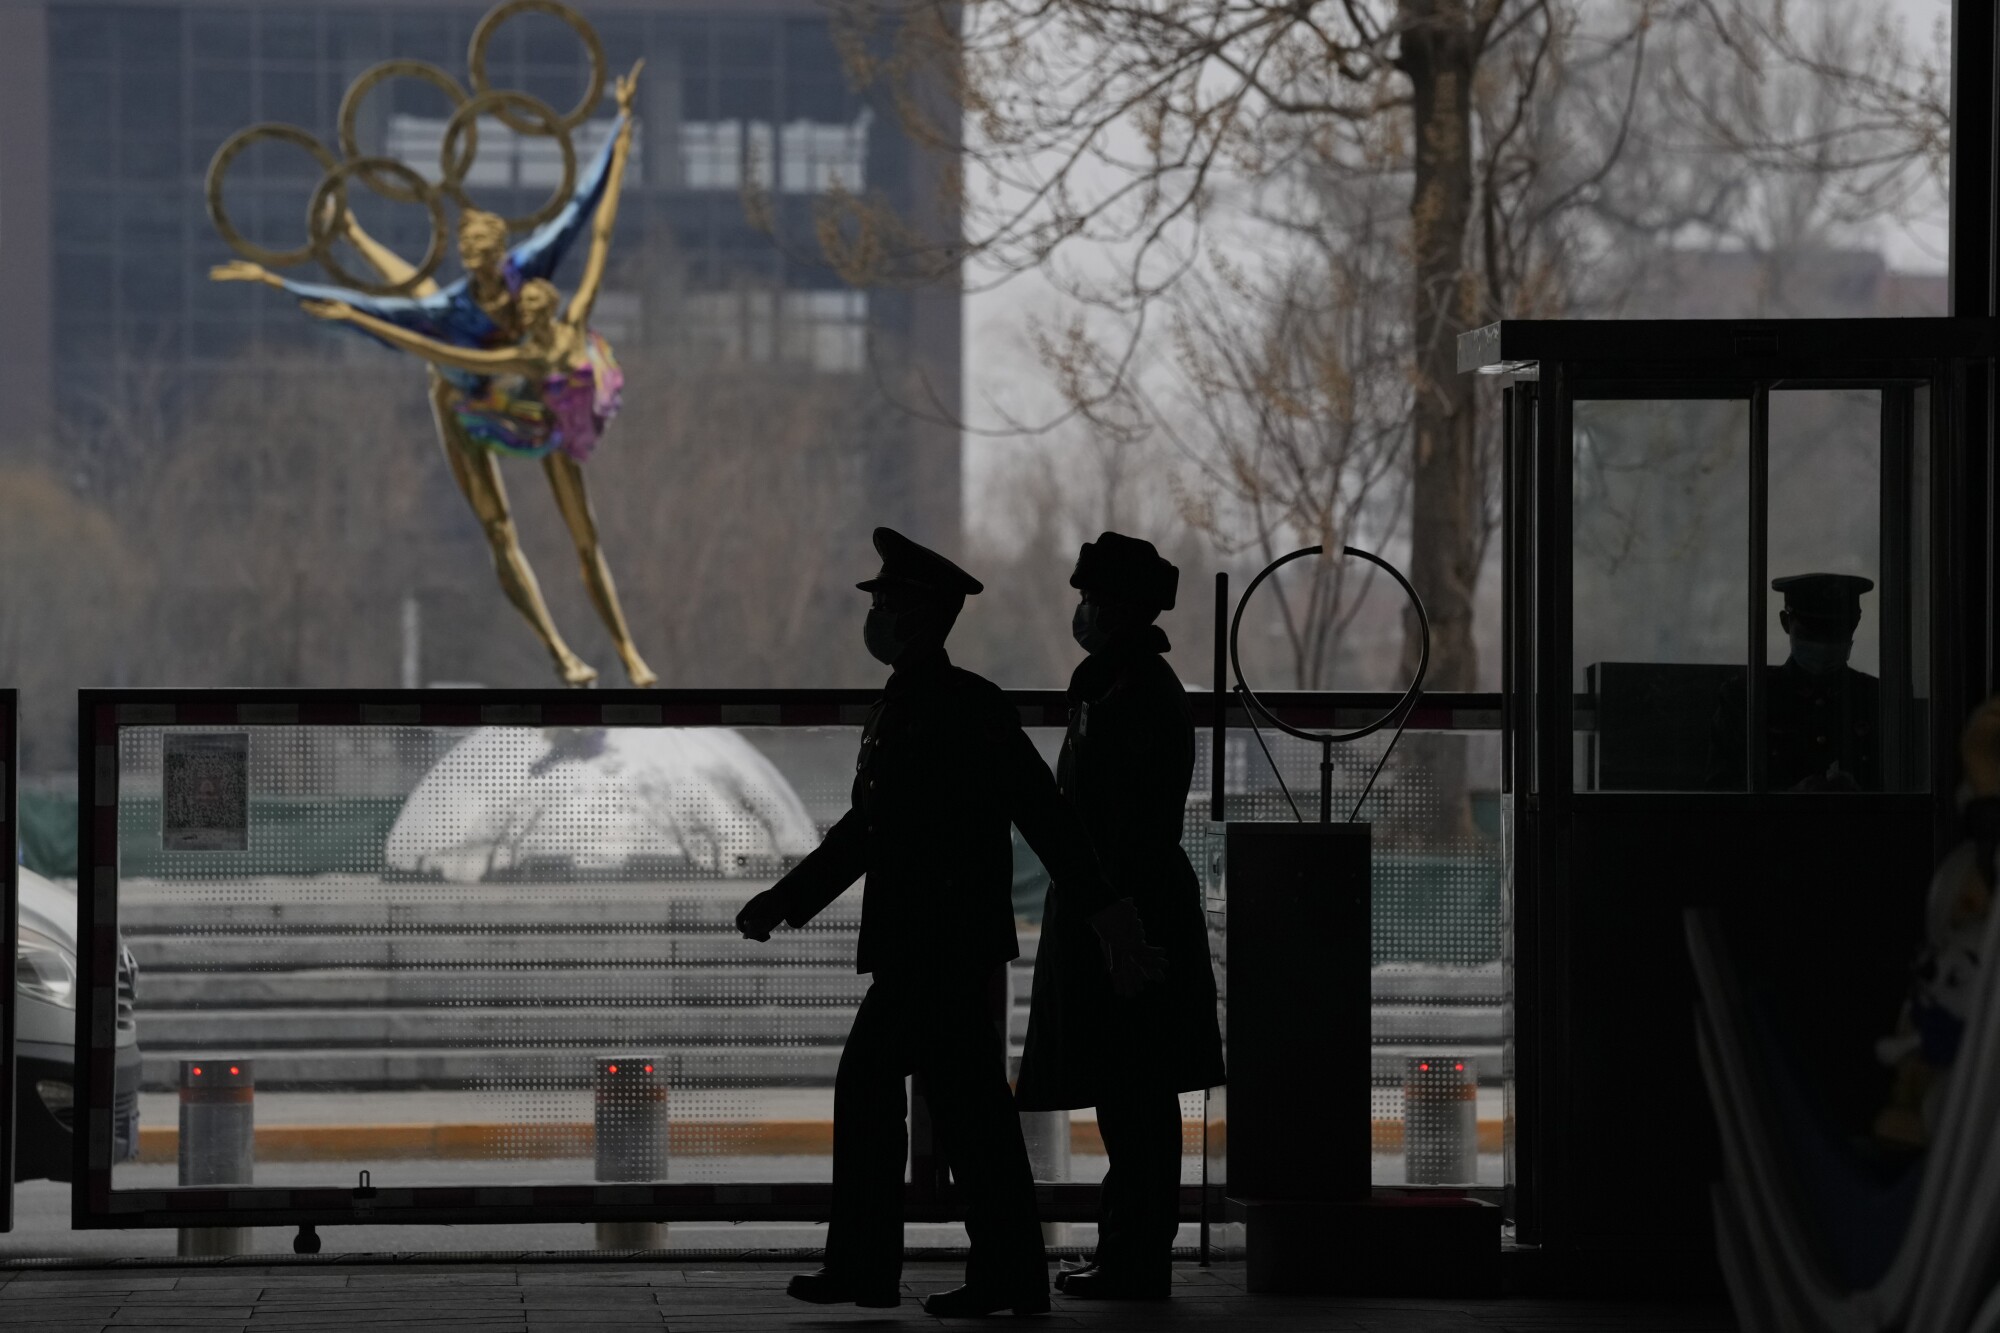 Two people stand in silhouette before a sculpture depicting two figure skaters with the Olympic rings